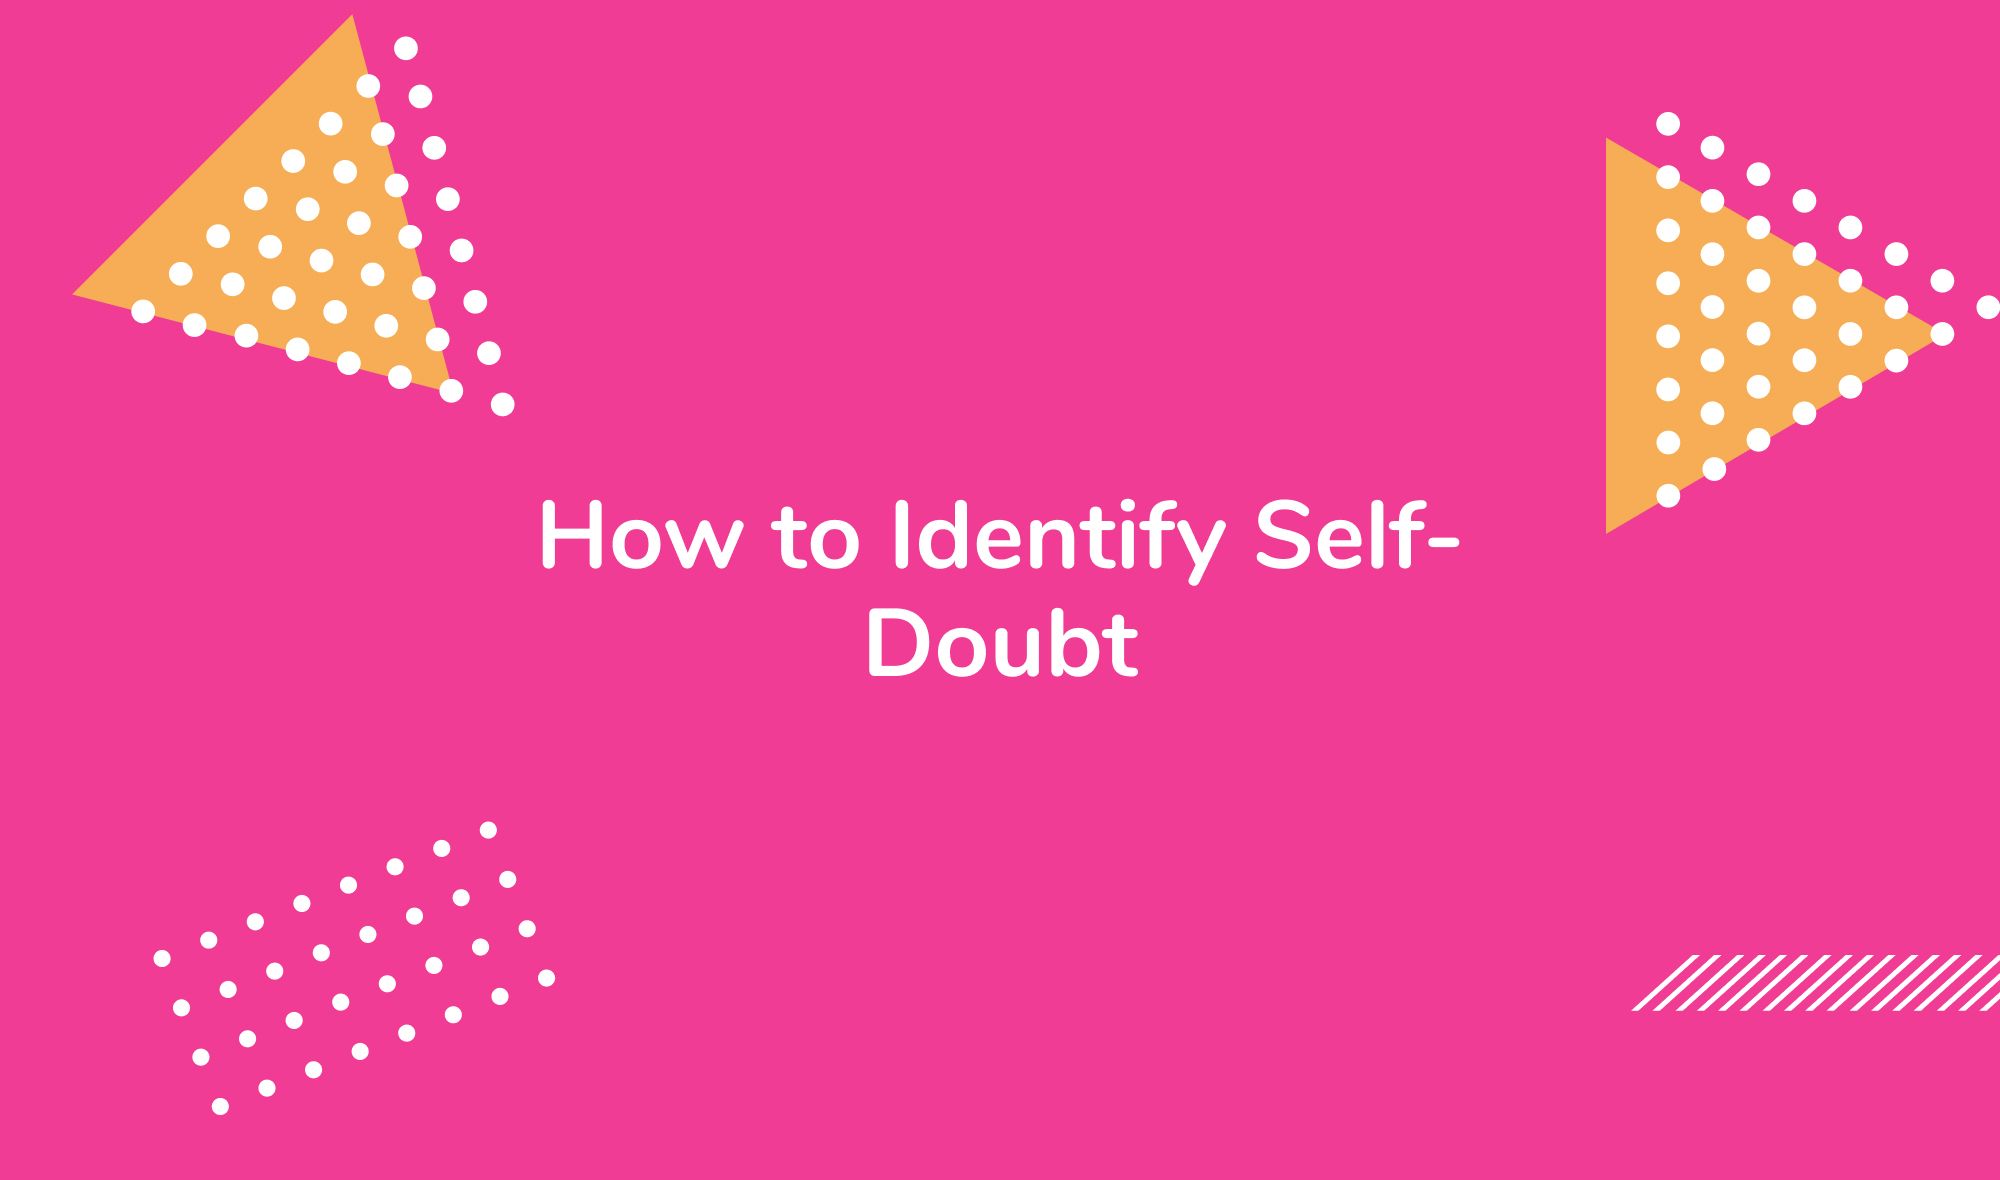 How to Identify Self-Doubt